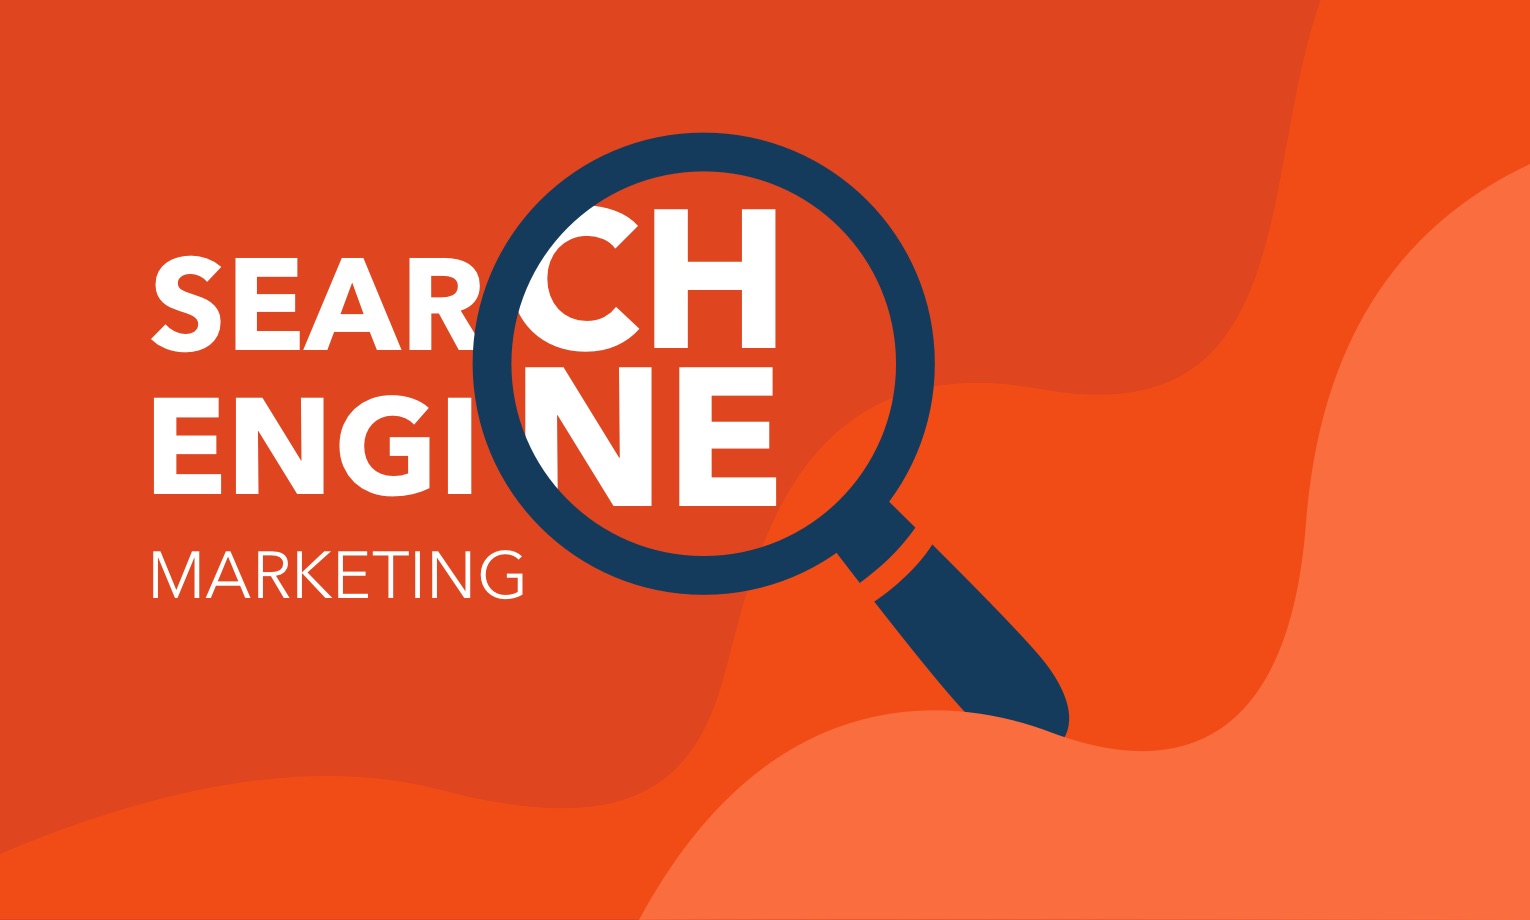 Magnifying glass over text that says Search Enging Marketing.